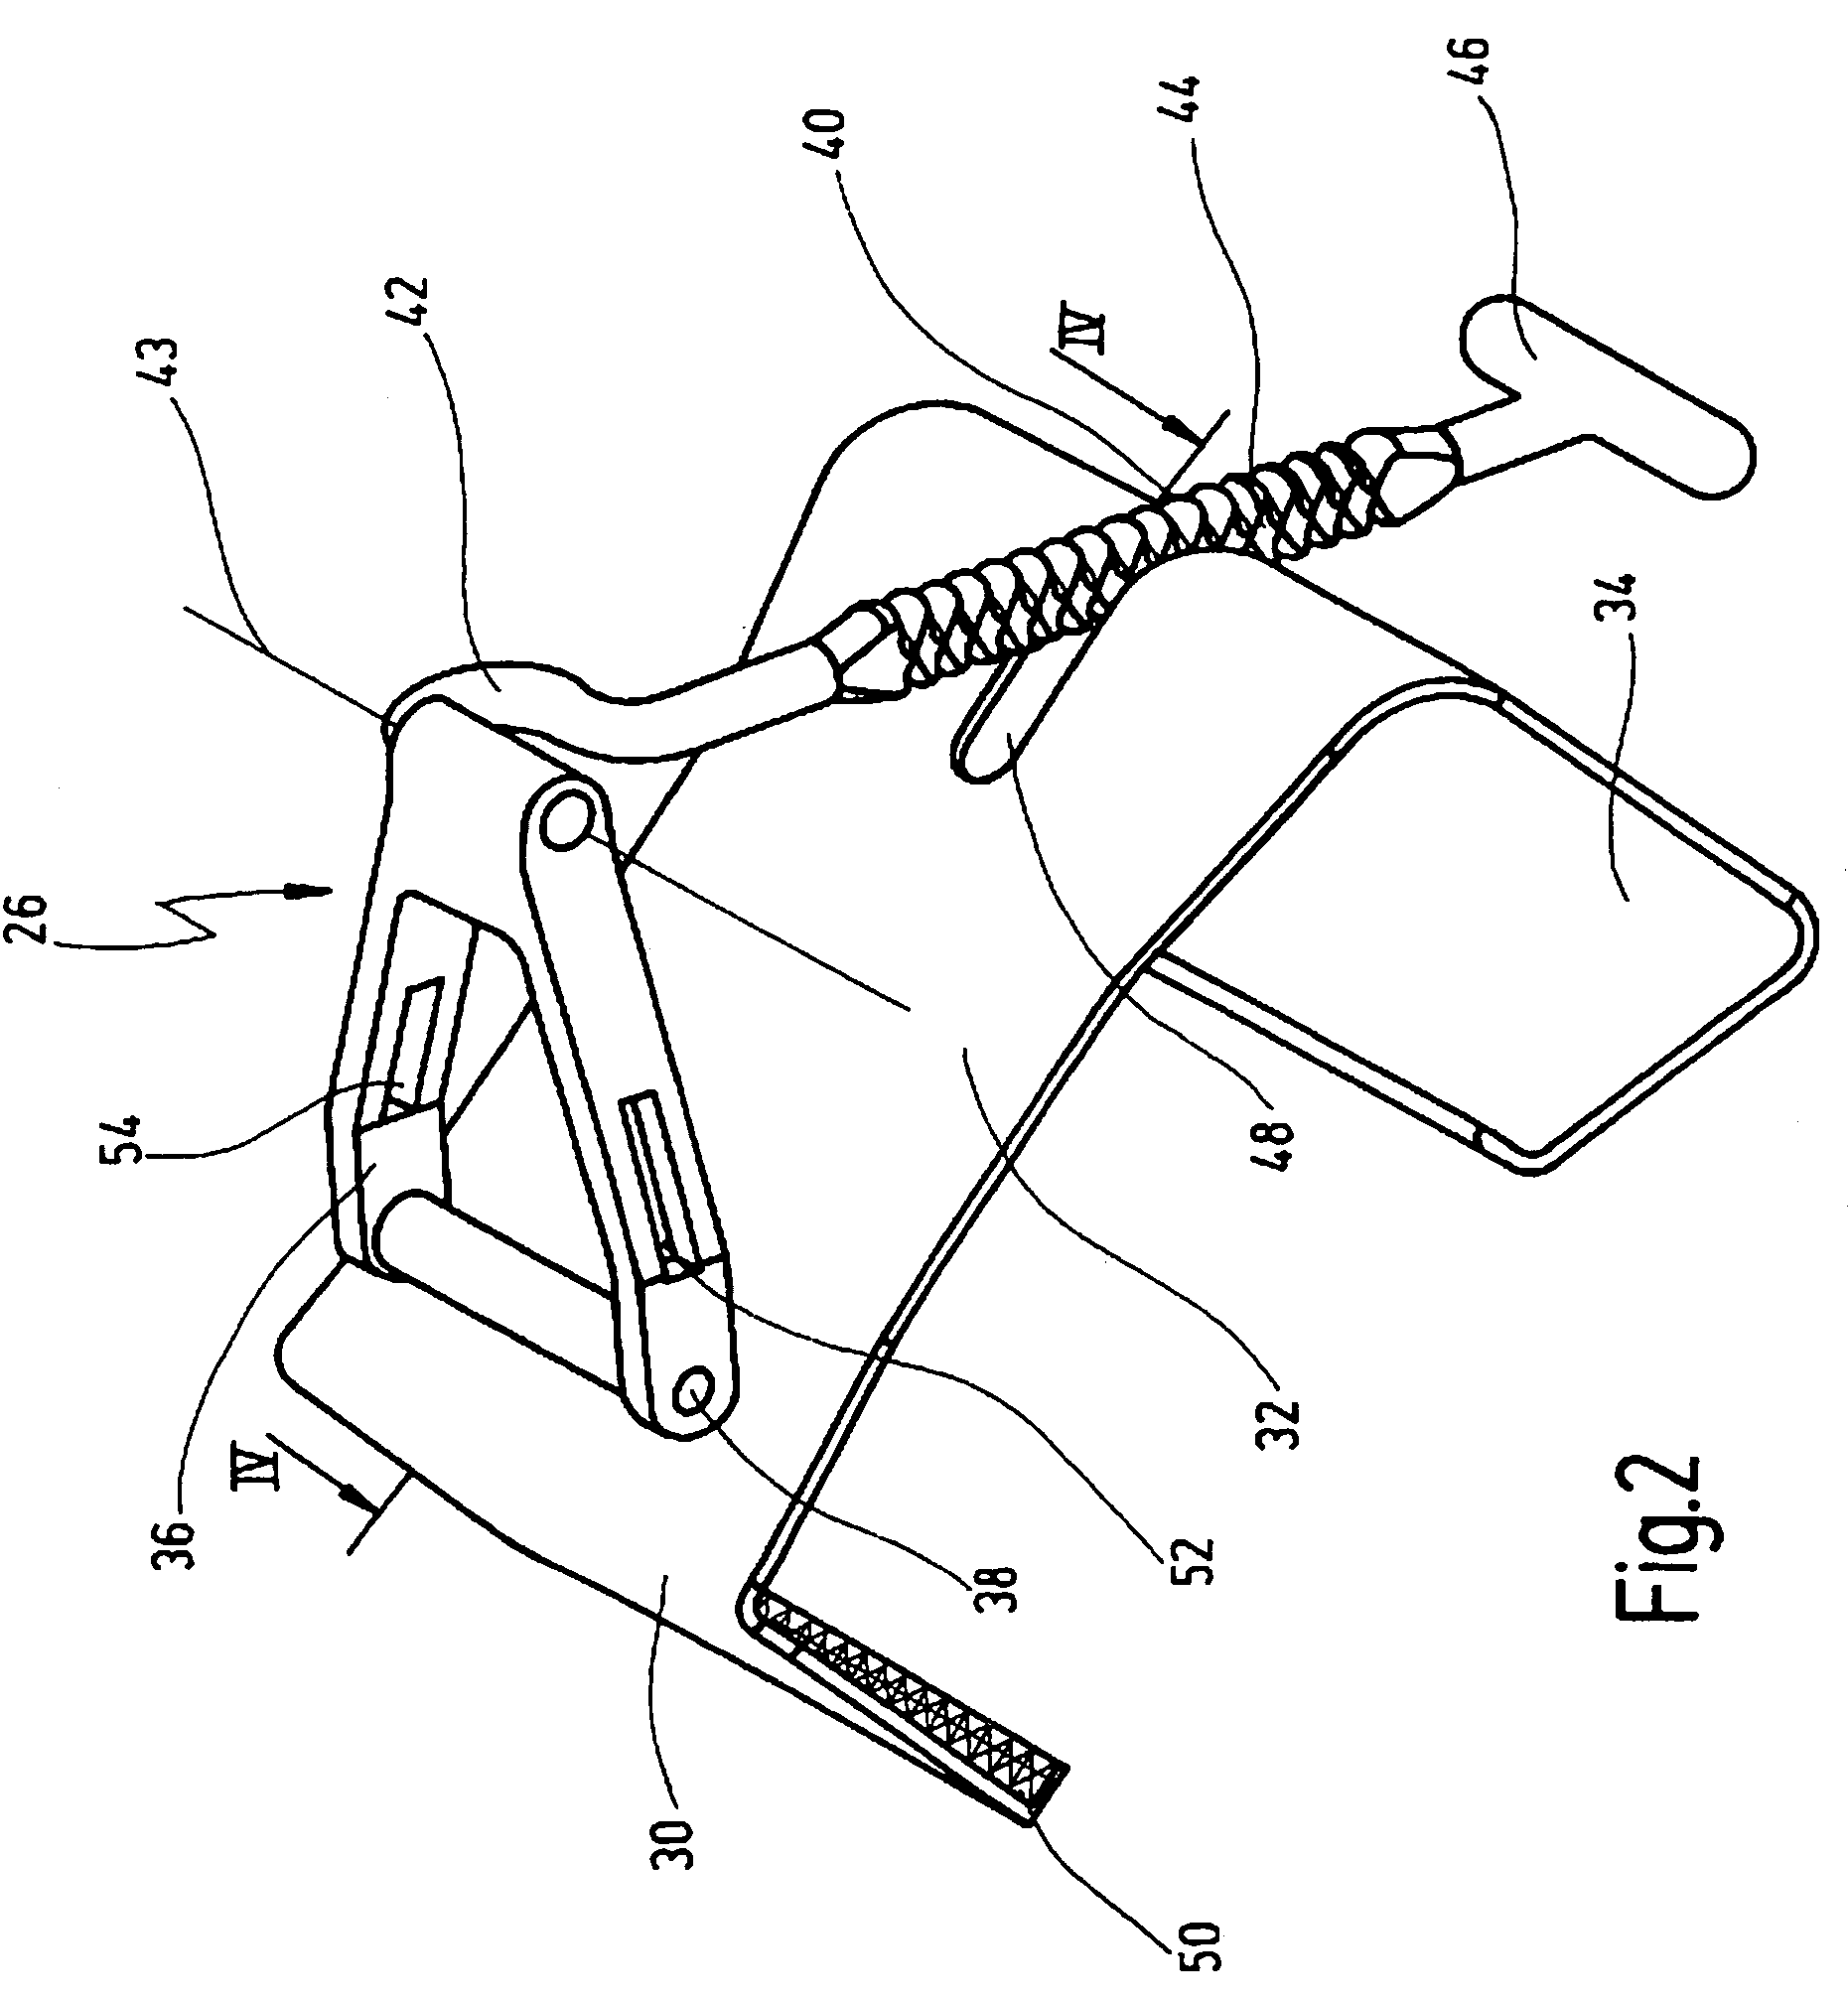 Retractor for performing heart and thorax surgeries